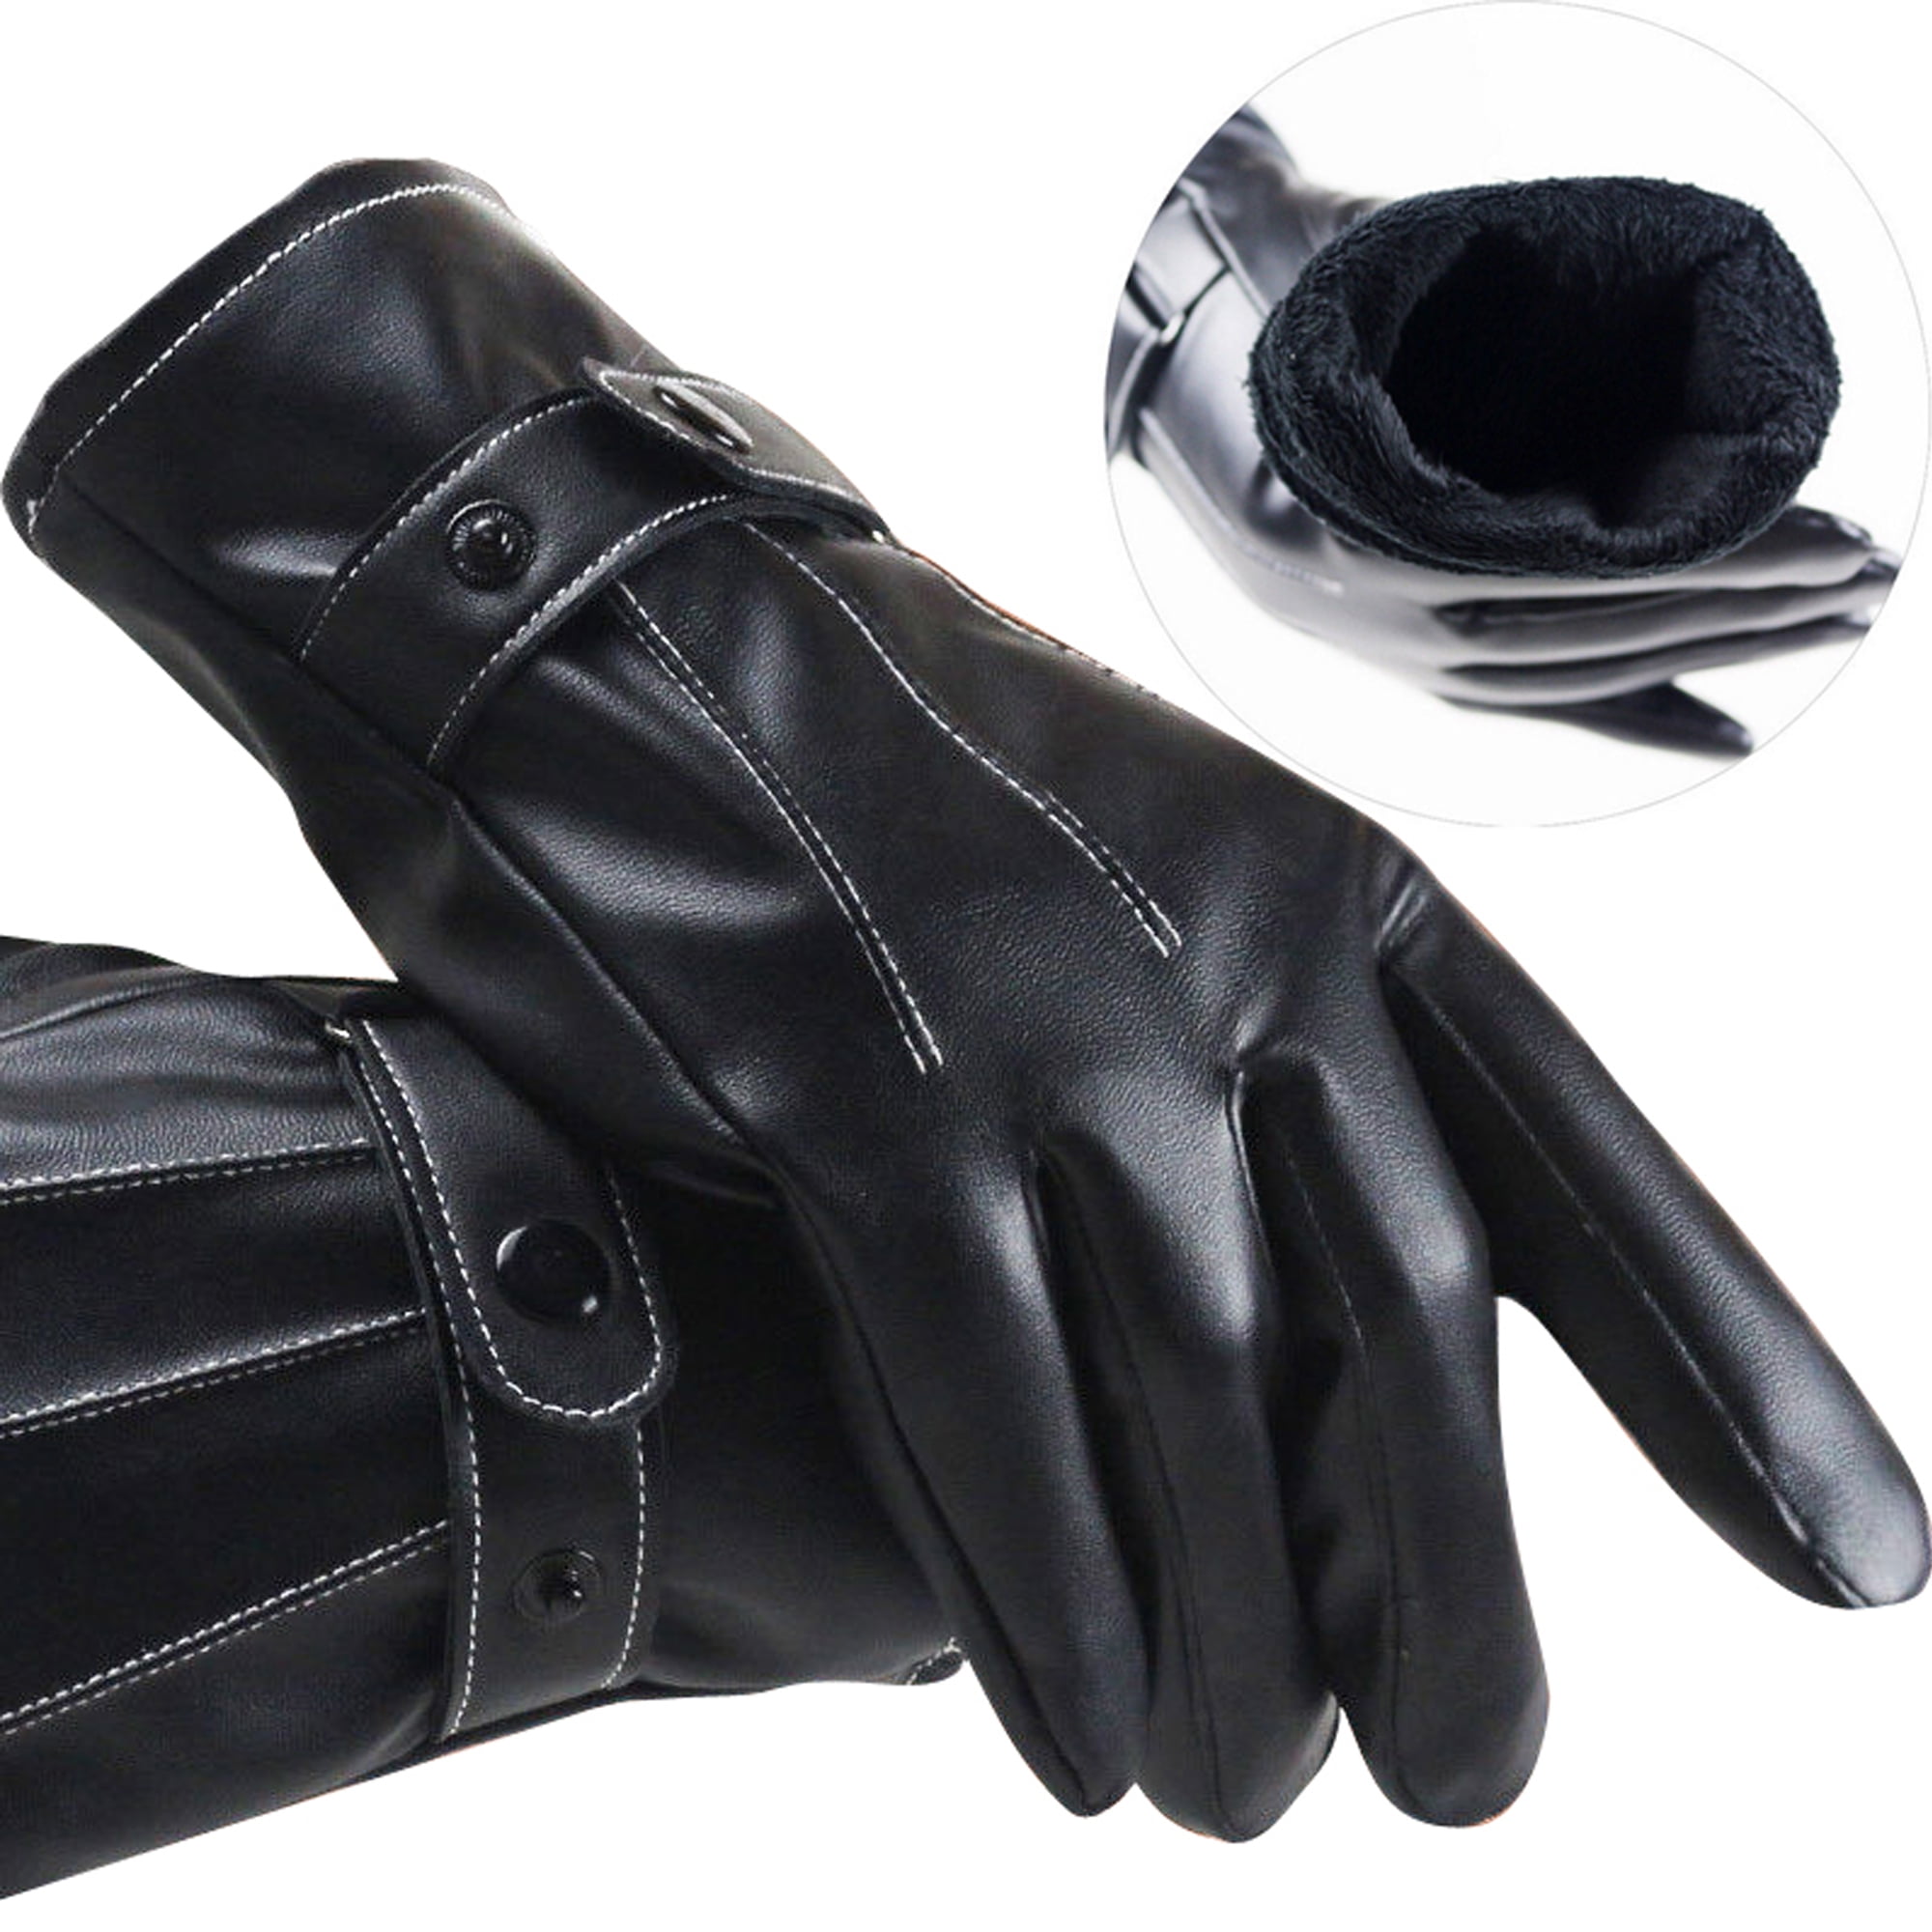 Men Warm Soft Real Leather Screen Touch Winter Waterproof Gloves Driving Gloves 